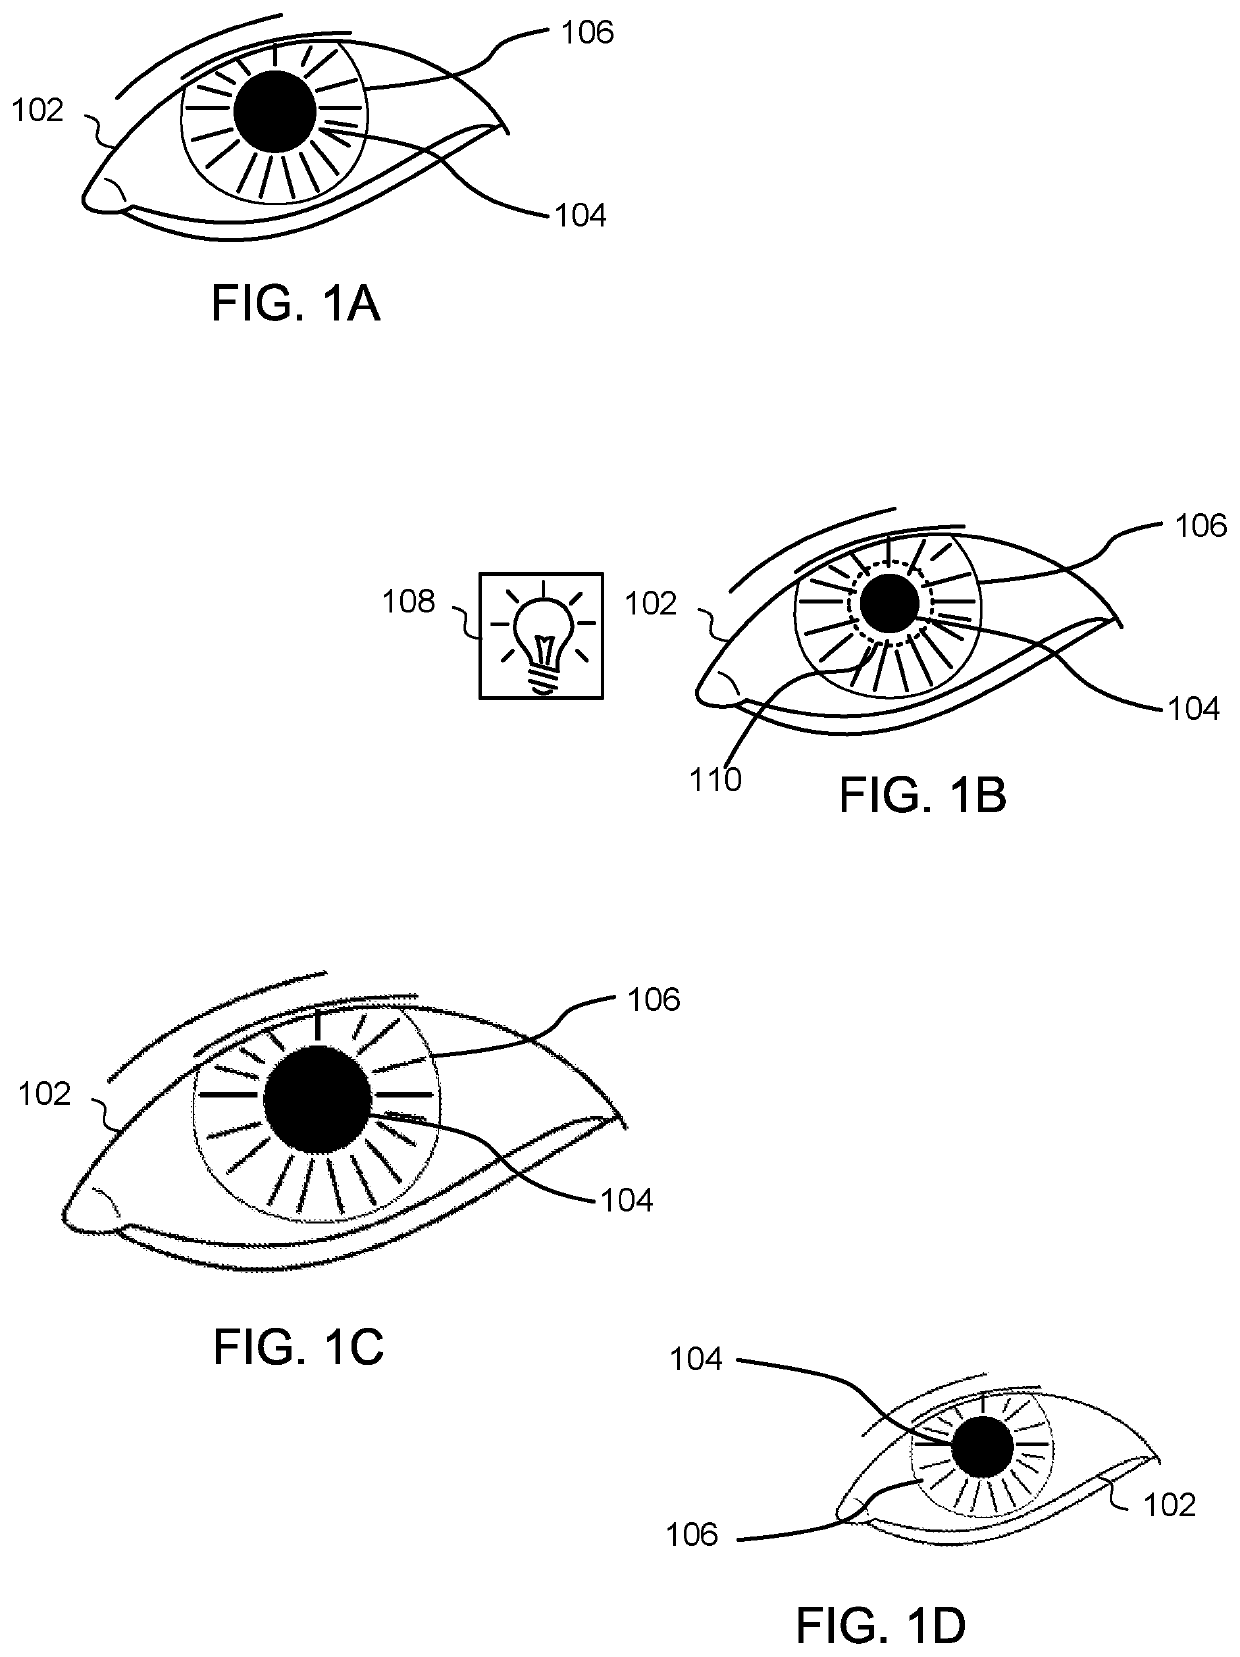 System and method for detection and continuous monitoring of neurological condition of a user